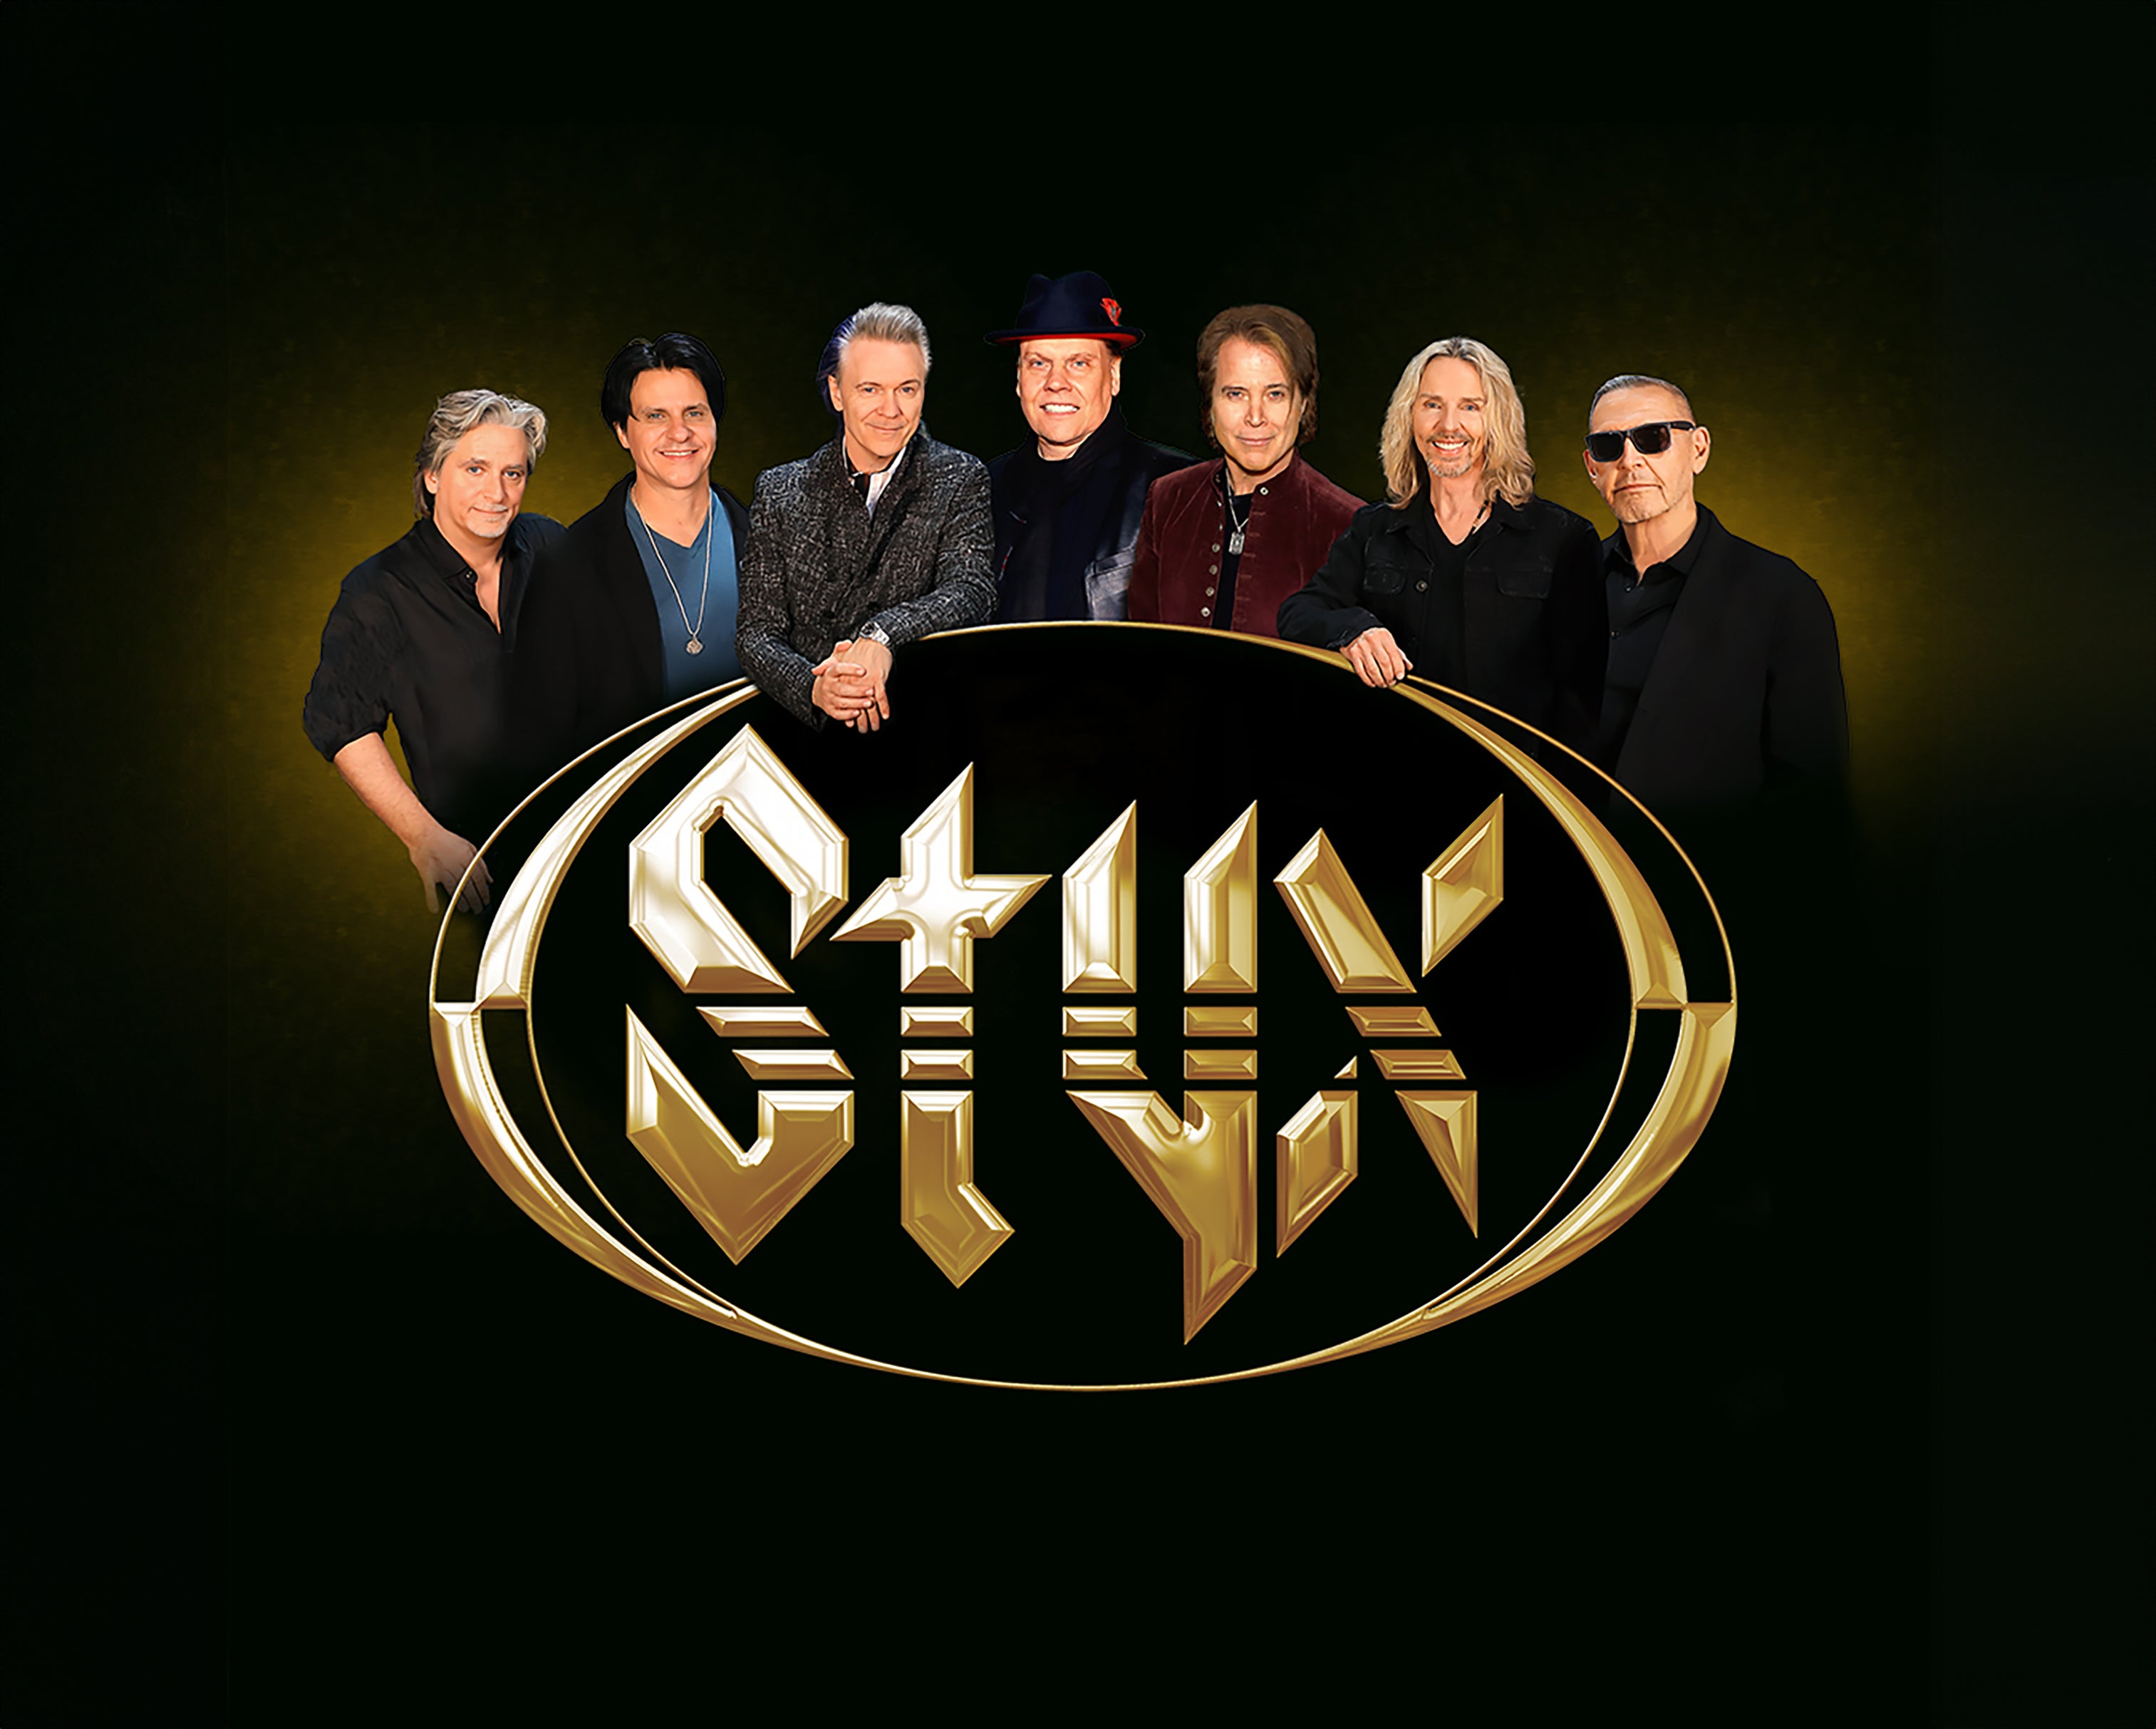 Styx & Foreigner with John Waite - Renegades and Juke Box Heroes Tour in Tampa promo photo for Official Platinum presale offer code